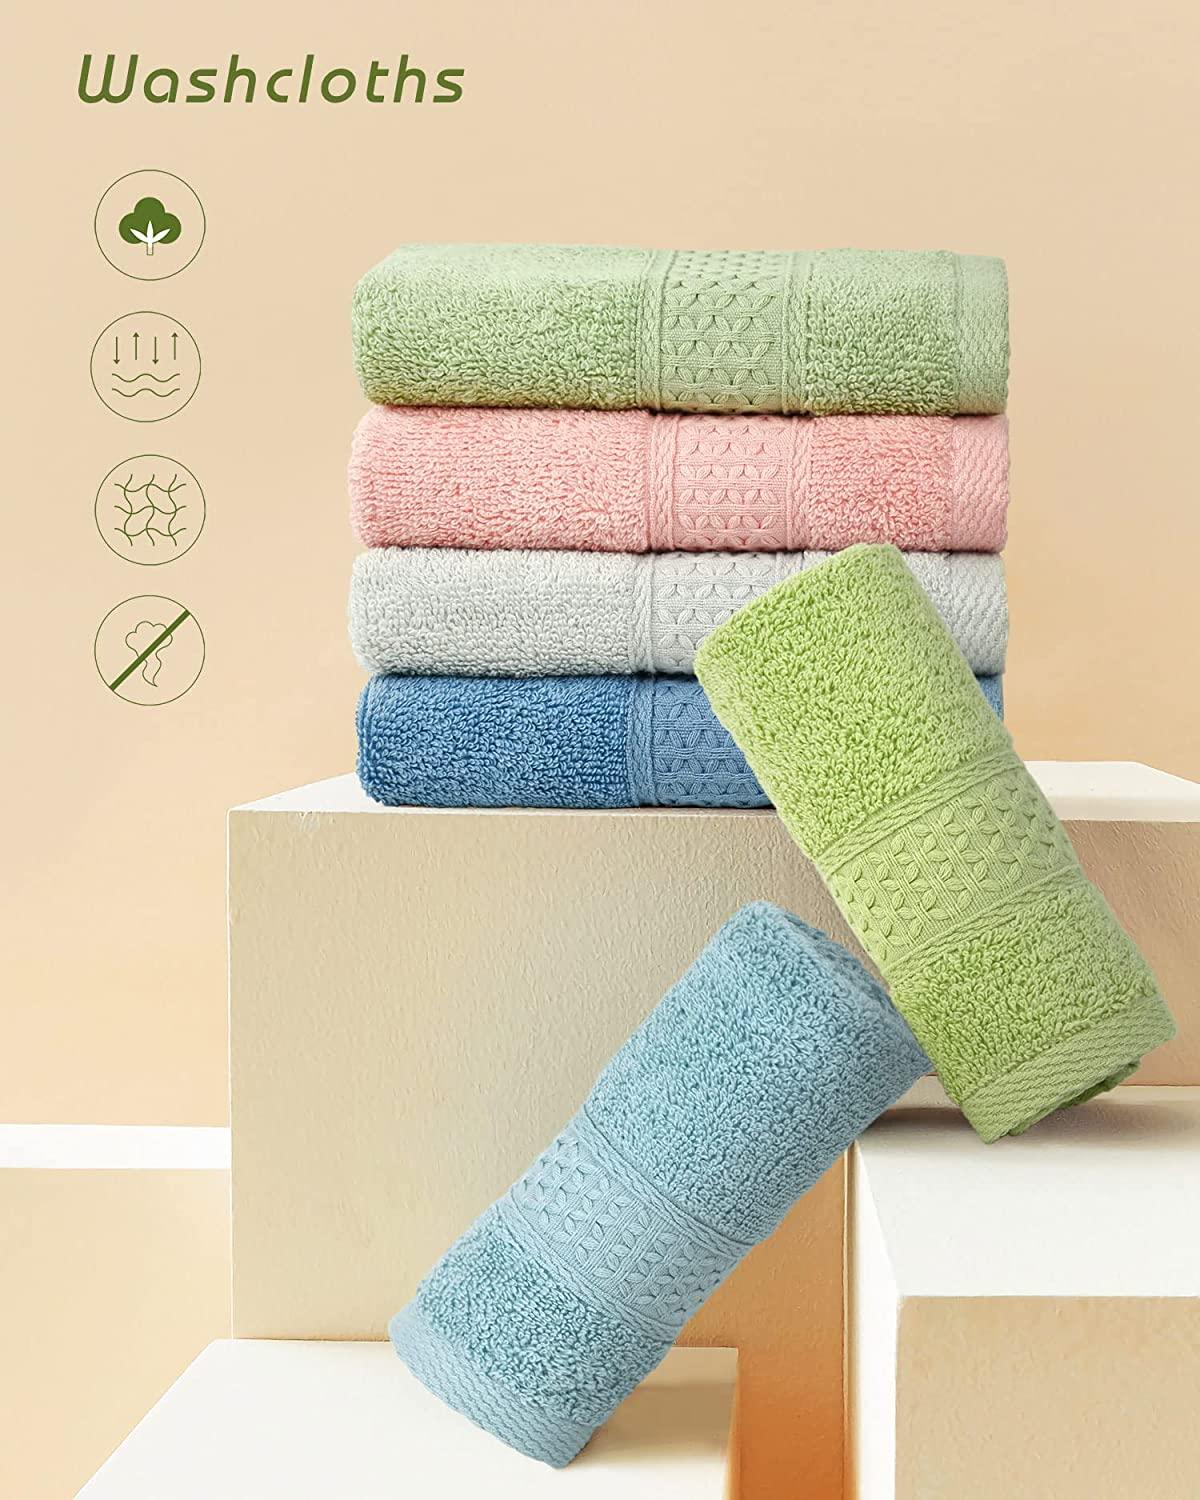  Cleanbear Hand Towels and Washcloths Set Bathroom Towels Set 6  Colors for Different Needs : Home & Kitchen